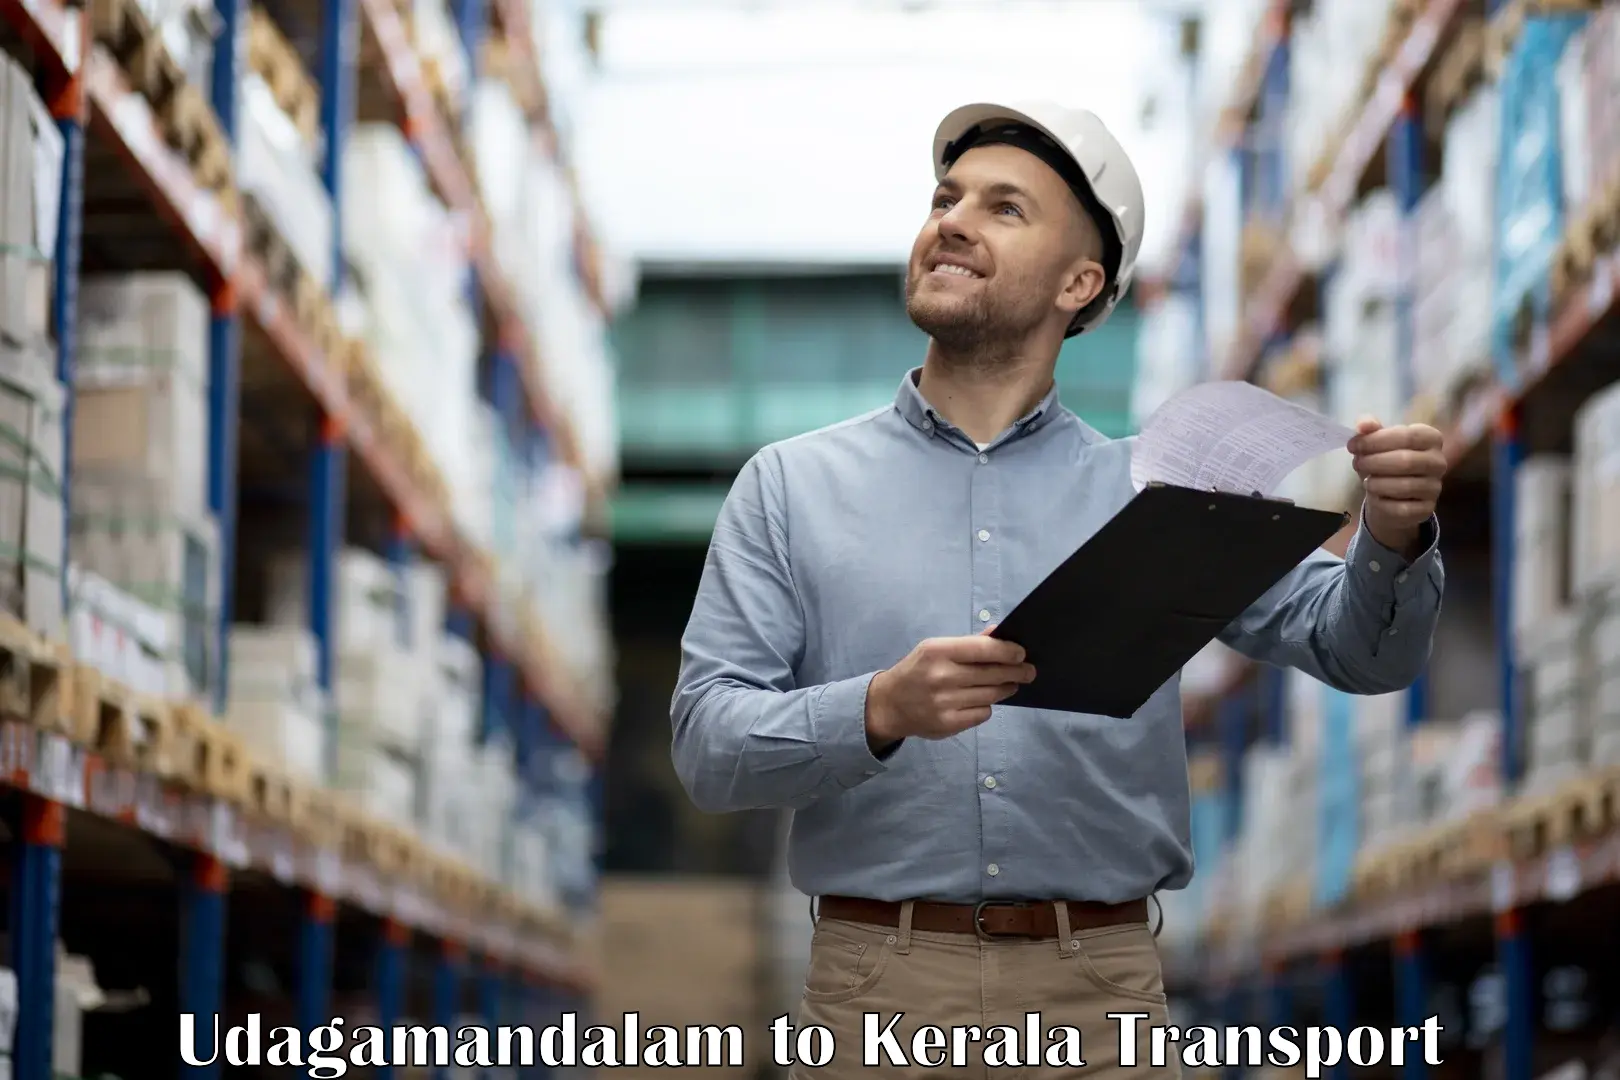 Nearby transport service Udagamandalam to Thrissur